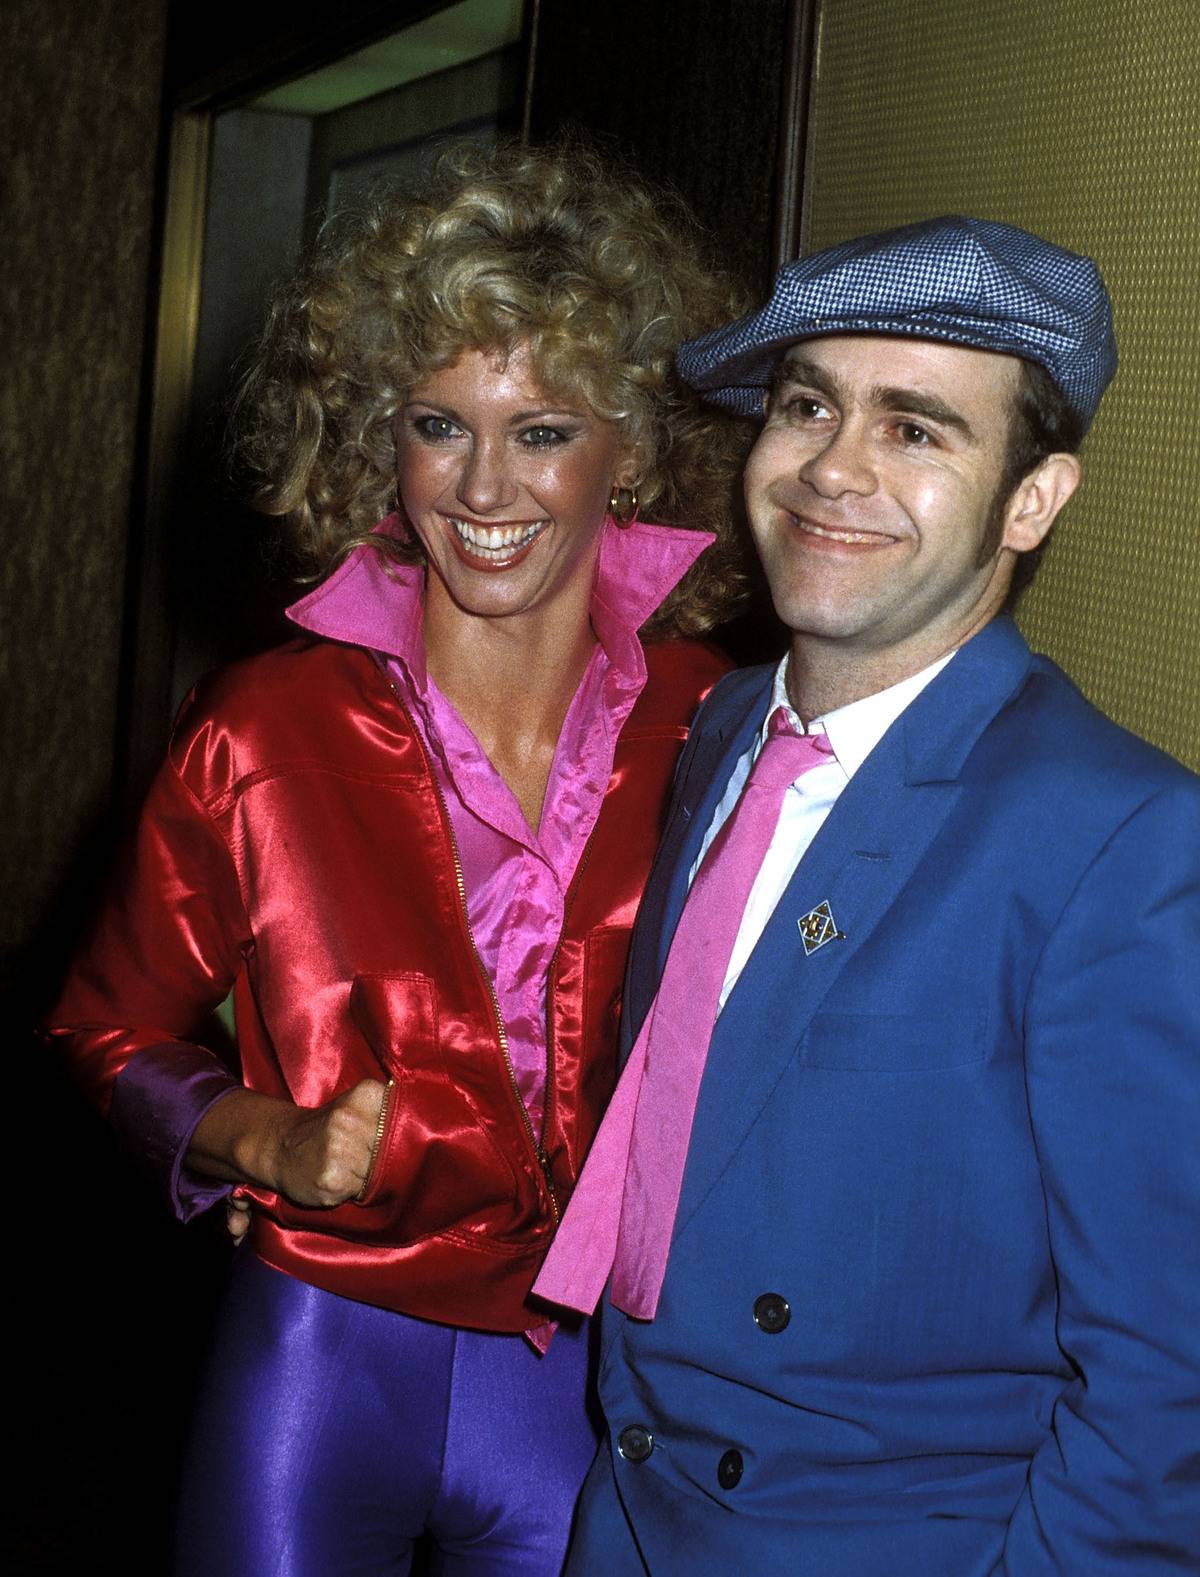 <p>The musical <i>Grease </i>was released in theaters in 1978. Of course, a premier party followed the iconic film, starring Oliva Newton-John and John Travolta. </p> <p>In Studio 54 in New York City, Newton-John and singer Elton John posed for a picture, both wearing brightly colored clothing and a huge smile on their face. Little did the actress know that the movie would become a classic.</p>